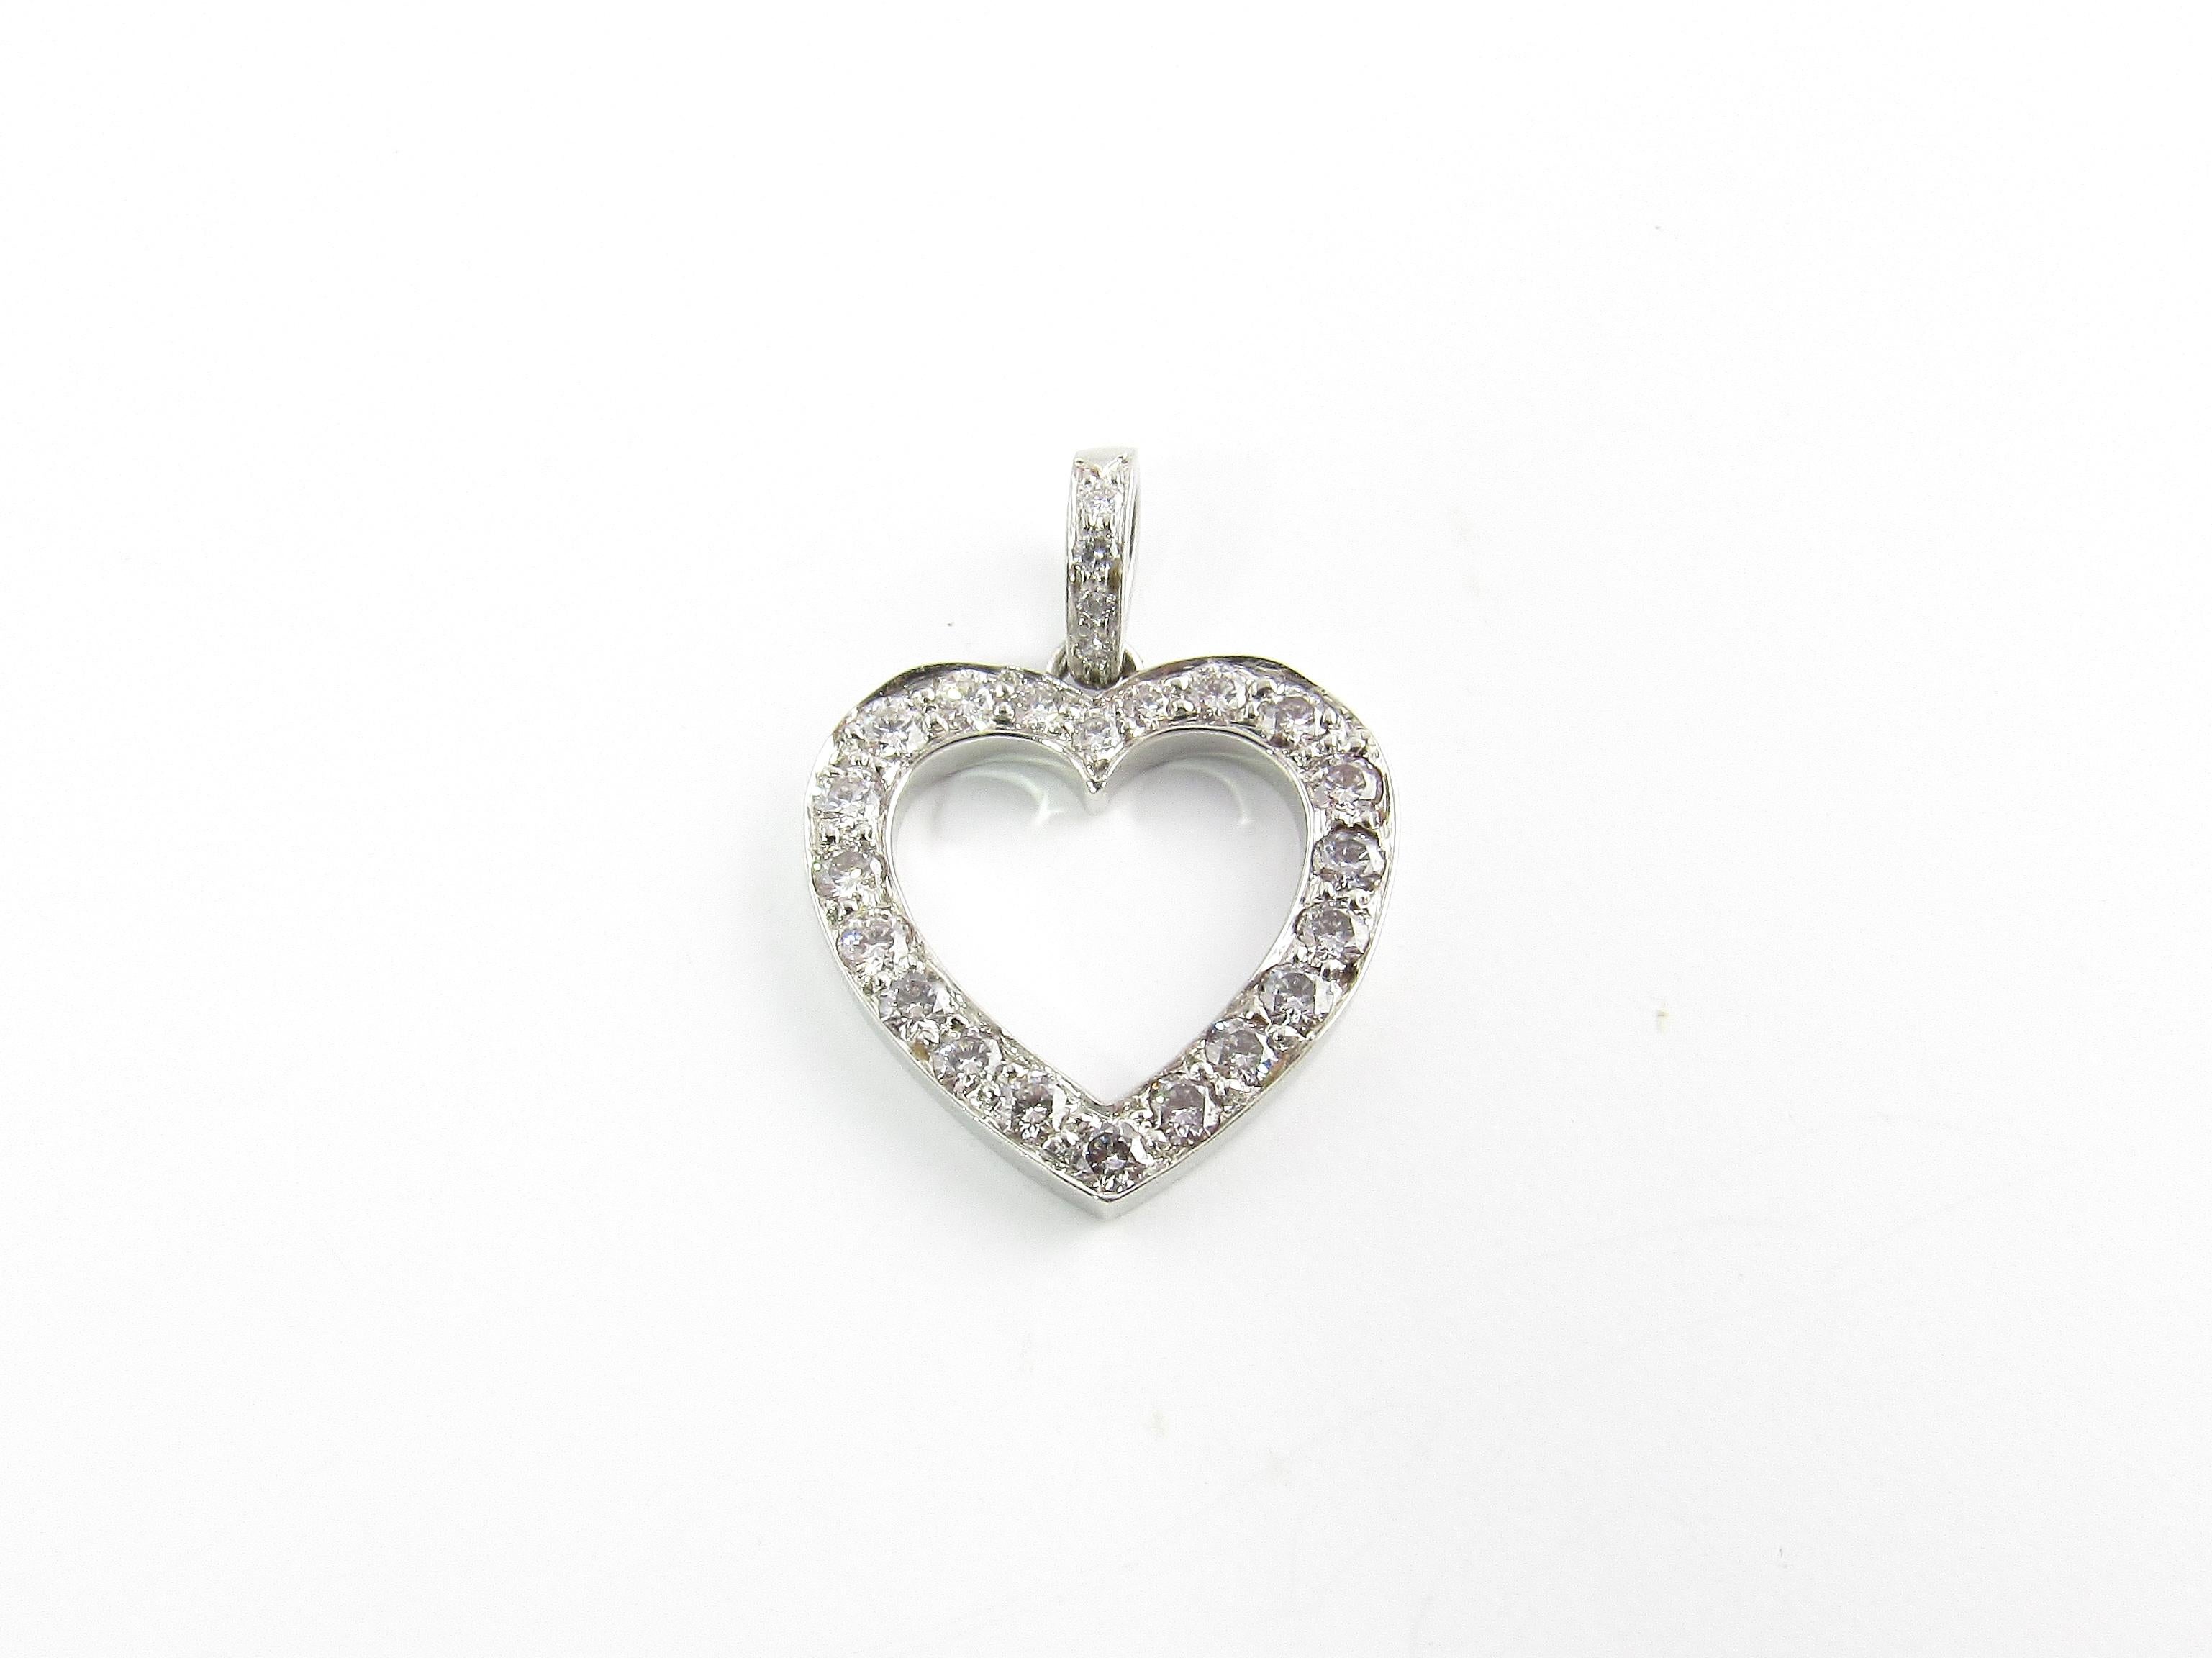 Tiffany & Co. Platinum Diamond Open Heart Pendant .65 cts

This gorgeous authentic Tiffany & Co open heart diamond pendant has lots of sparkle

The pendant hangs approx. 21 mm in length and is 16 mm wide and 2 mm thick.

It is set with 24 round